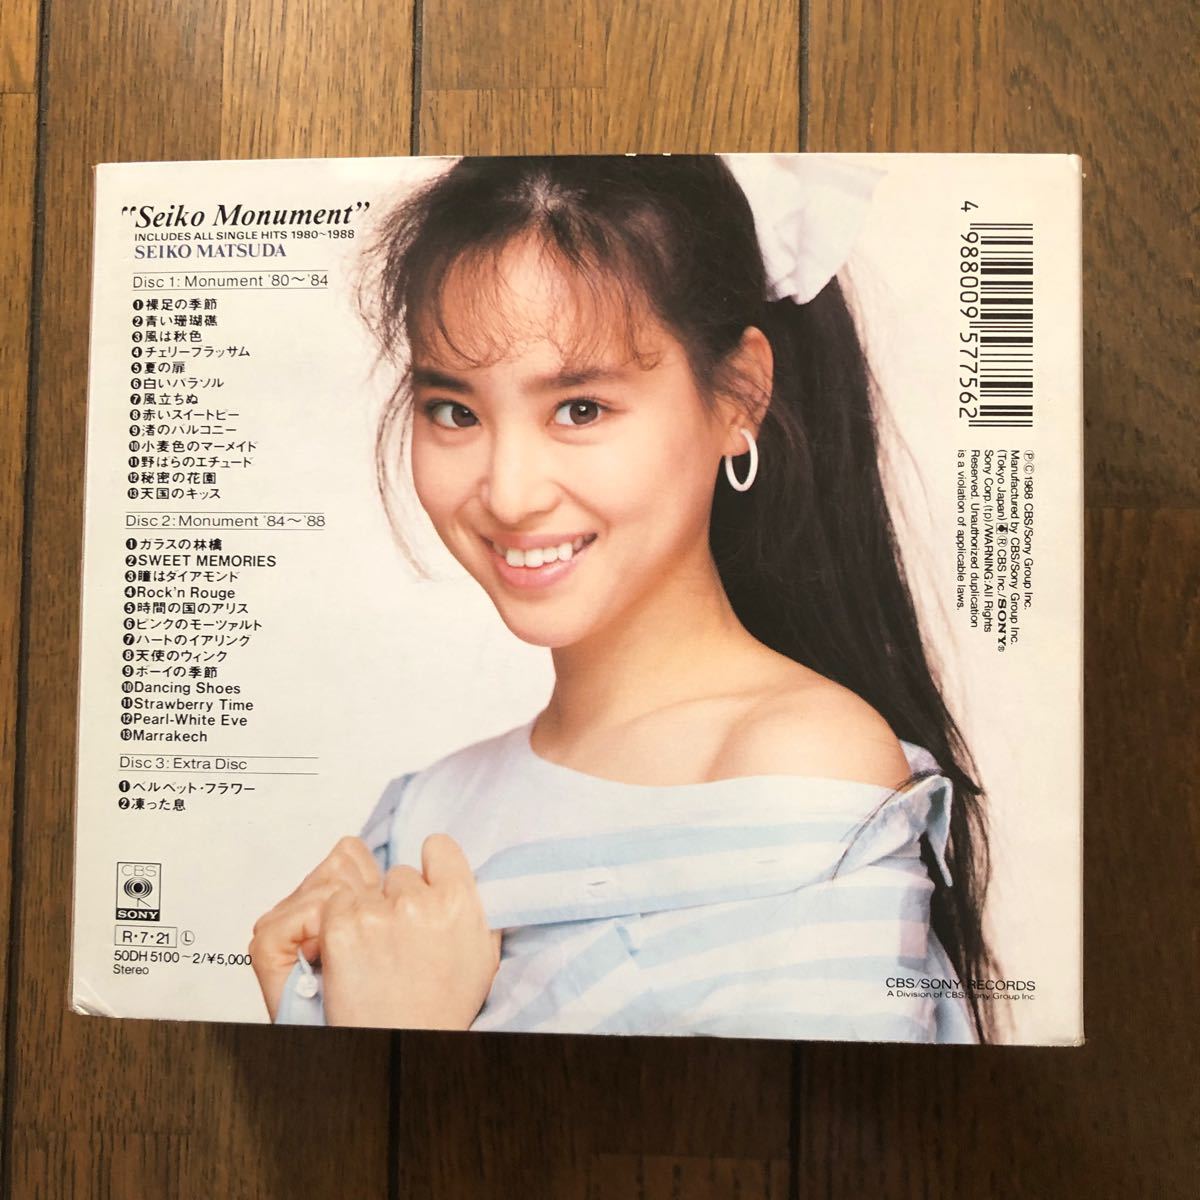 Seiko Monument 松田聖子 【Includes All Singles Hits 1980 〜 1988】CD3枚組